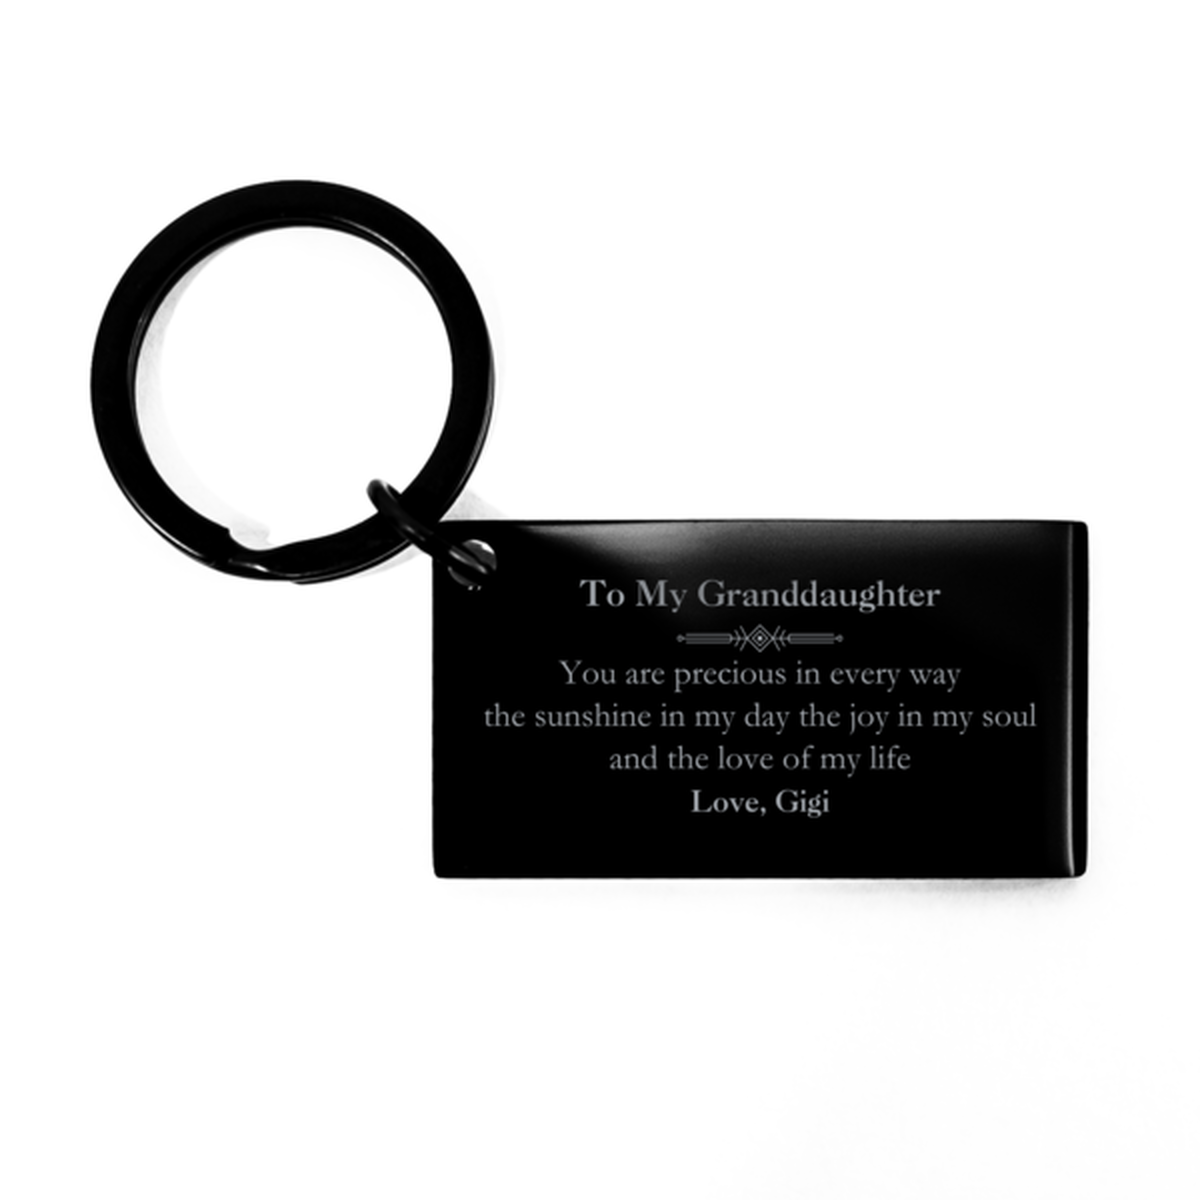 Graduation Gifts for Granddaughter Keychain Present from Gigi, Christmas Granddaughter Birthday Gifts Granddaughter You are precious in every way the sunshine in my day. Love, Gigi